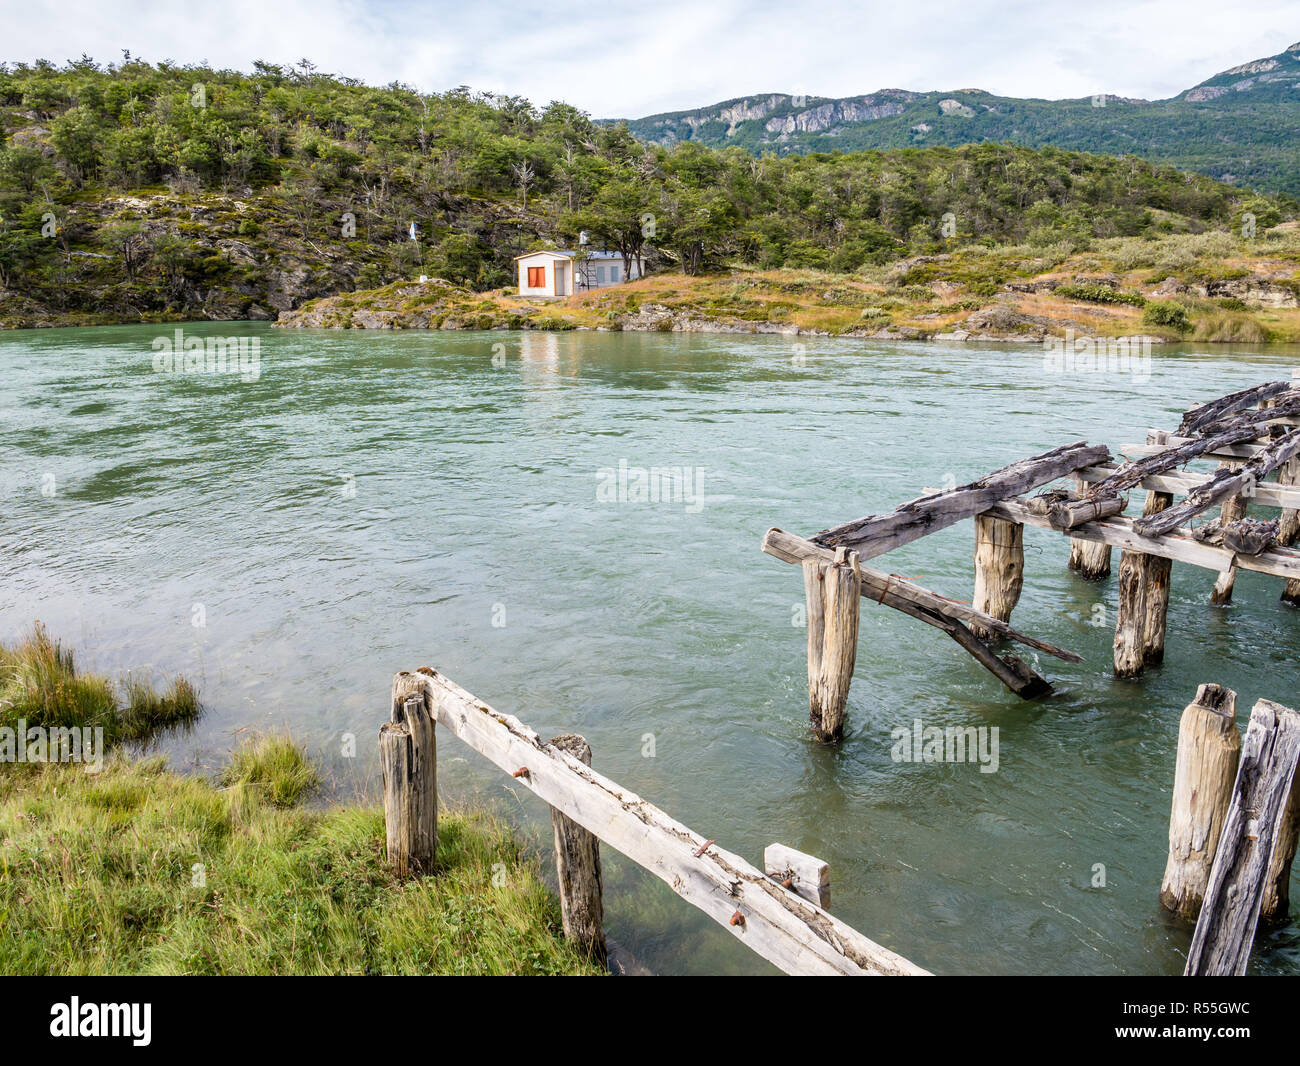 Lapataia River with house and old jetty, Tierra del Fuego National Park, Patagonia, Argentina Stock Photo